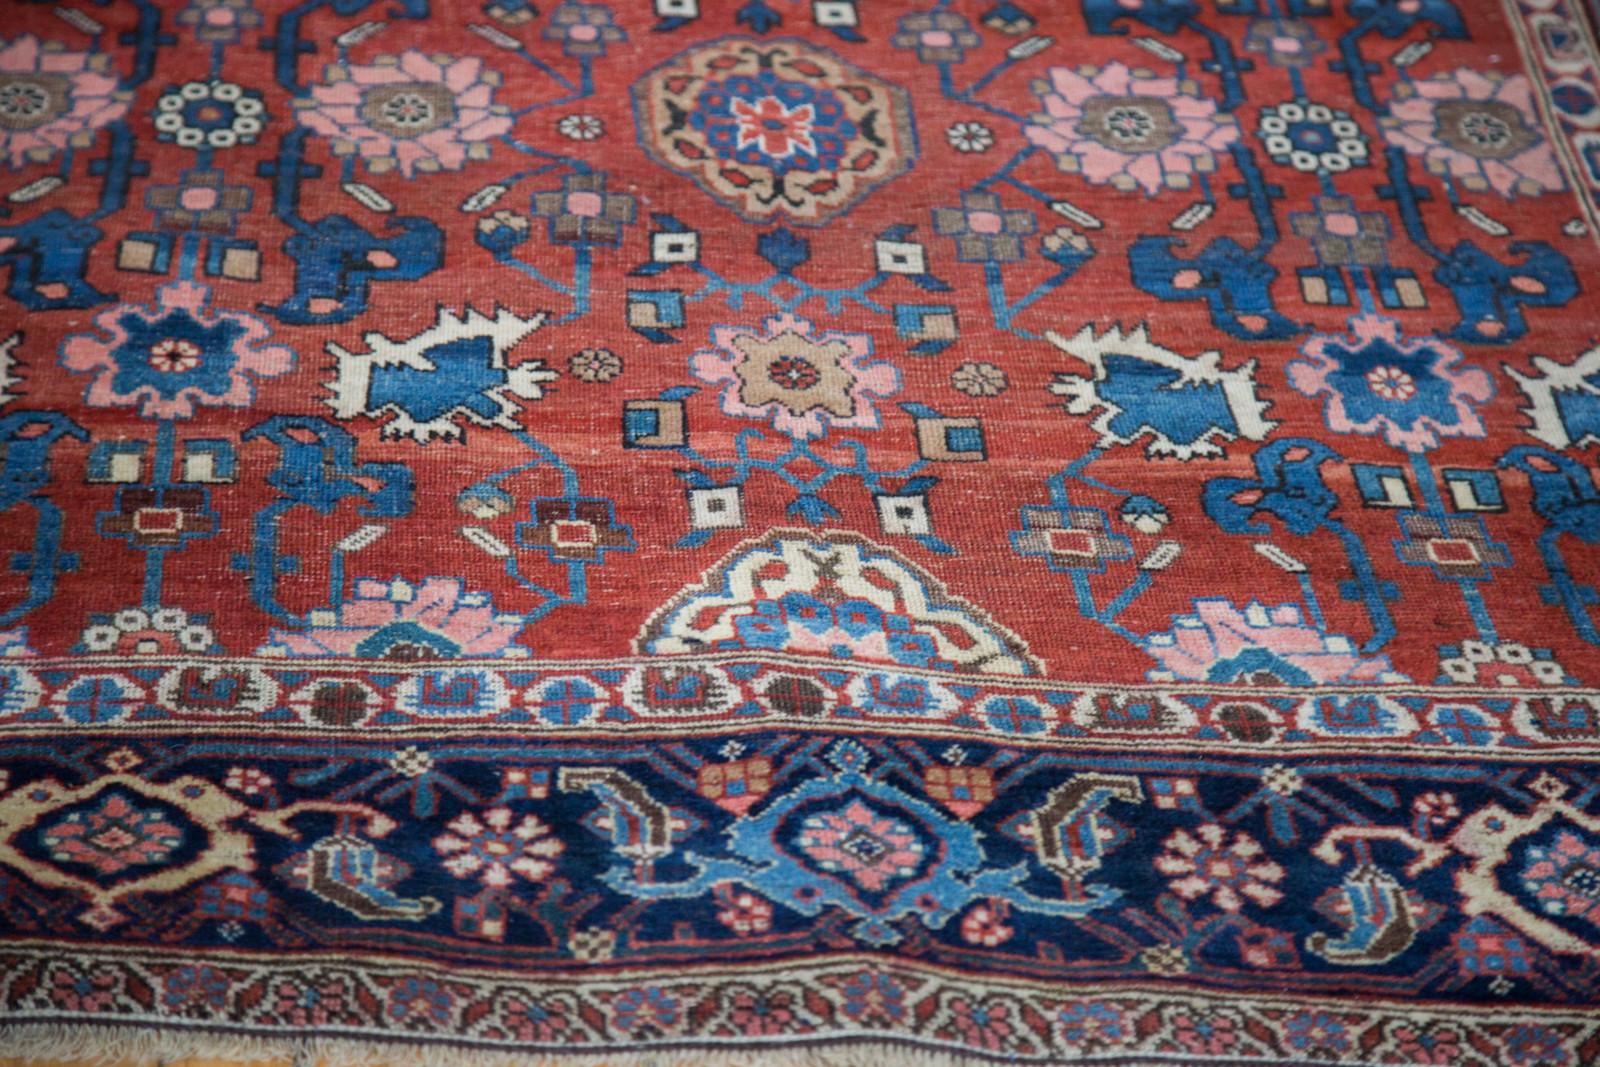 :: Stunning antique Halvai Bijar vintage 1910's, 20's in an allover harshang design- Lovely shades in a wide range of colors- Carpet is super supple, pliable and healthy. Many years of enjoyment to come with this rug! Recently professionally